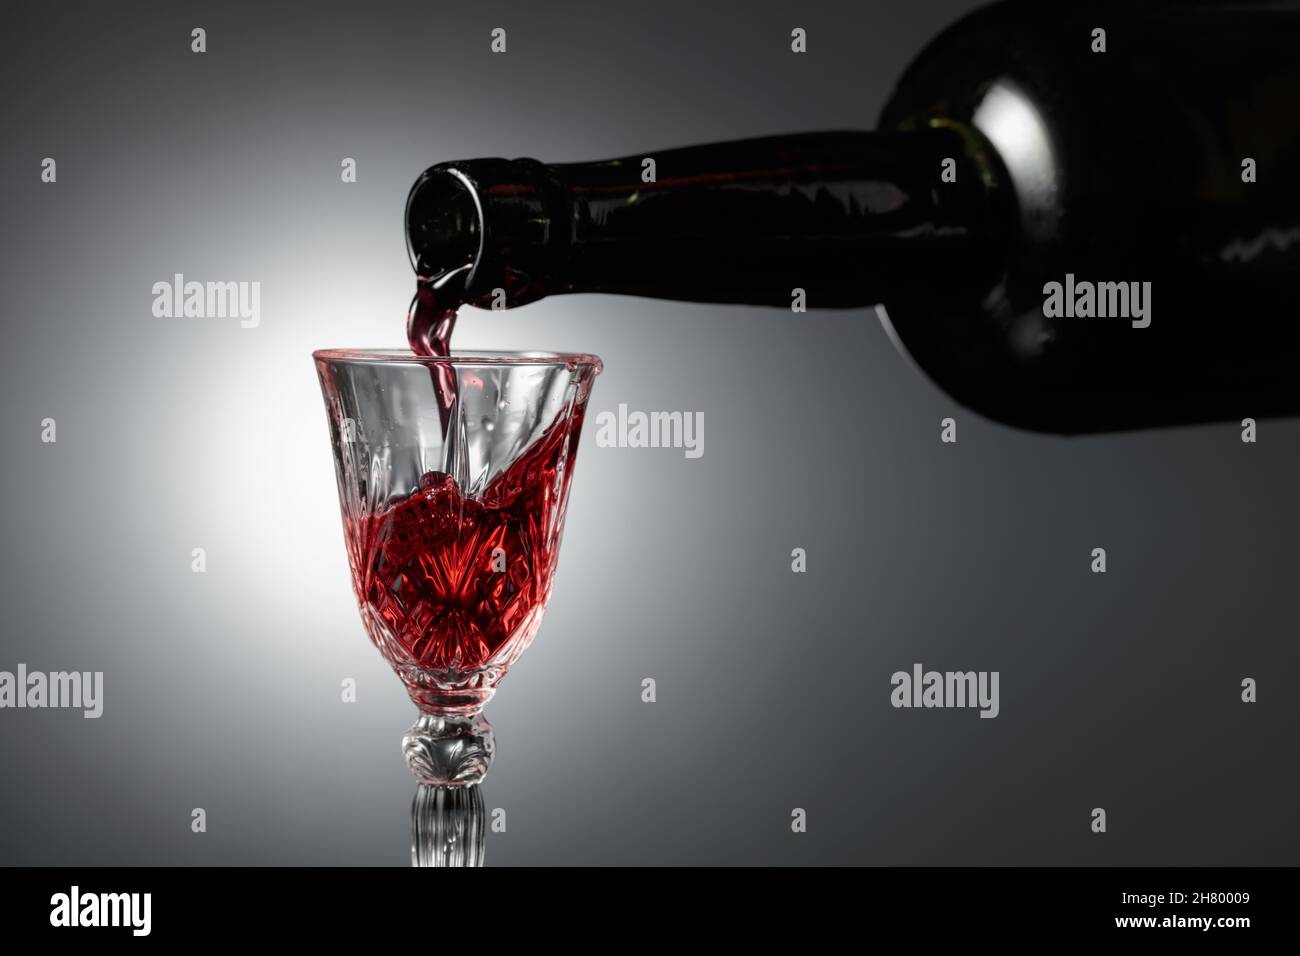 Dessert wine or liqueur is poured into a glass from an ancient bottle. Copy space. Stock Photo